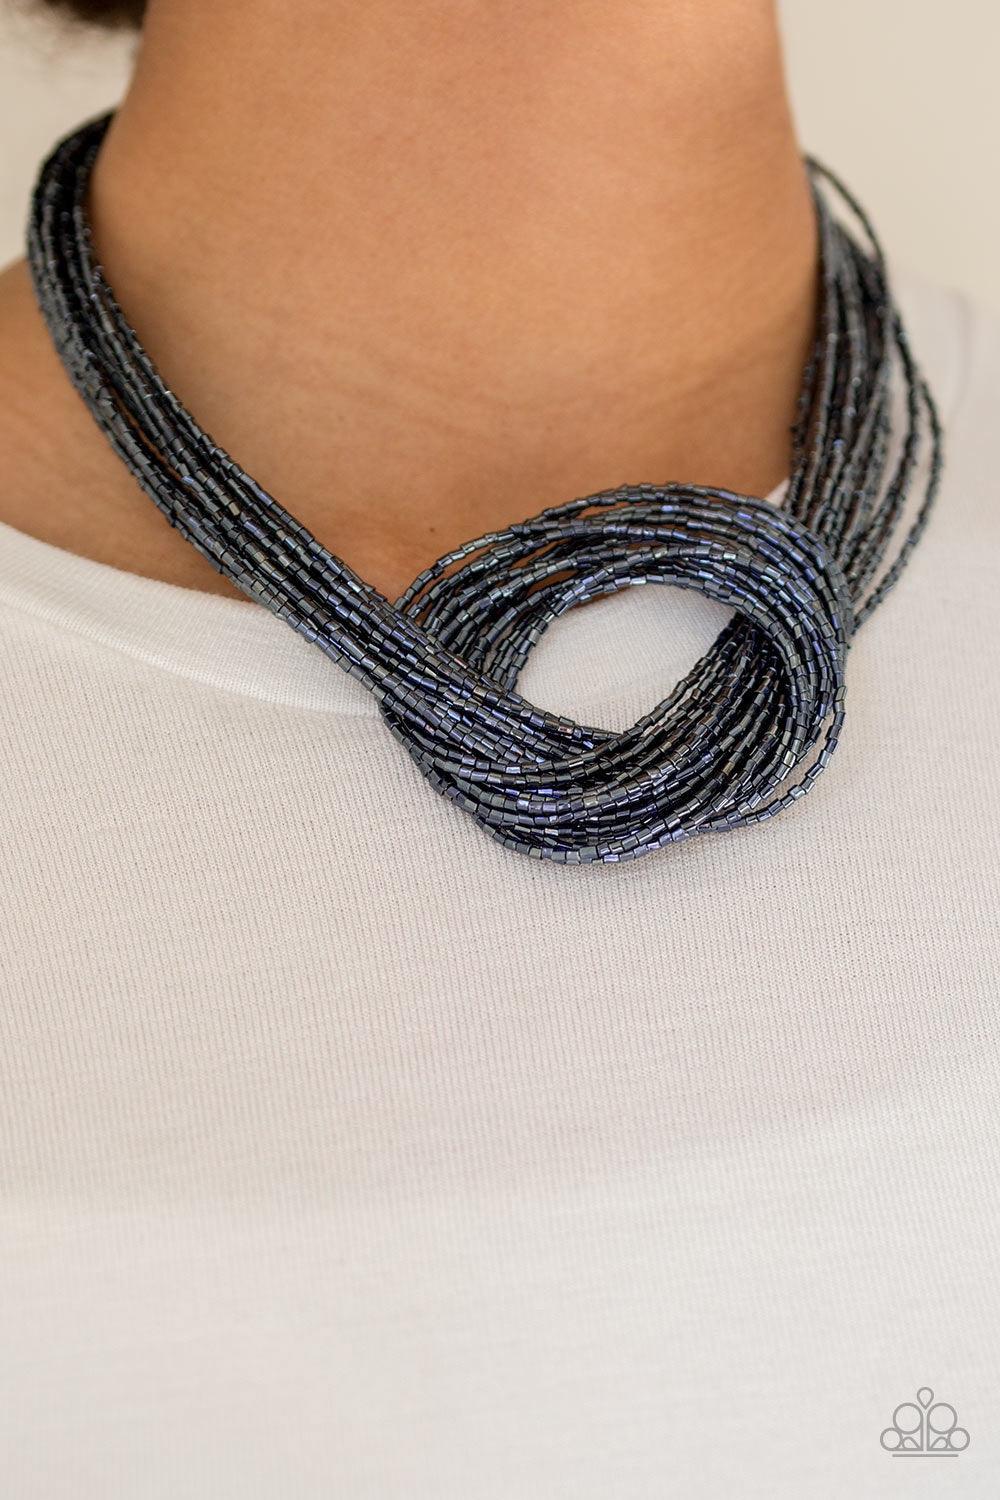 Paparazzi Accessories Knotted Knockout - Blue Countless strands of metallic blue seed beads delicately knot together below the collar to create an unforgettable statement piece. Features an adjustable clasp closure. Jewelry